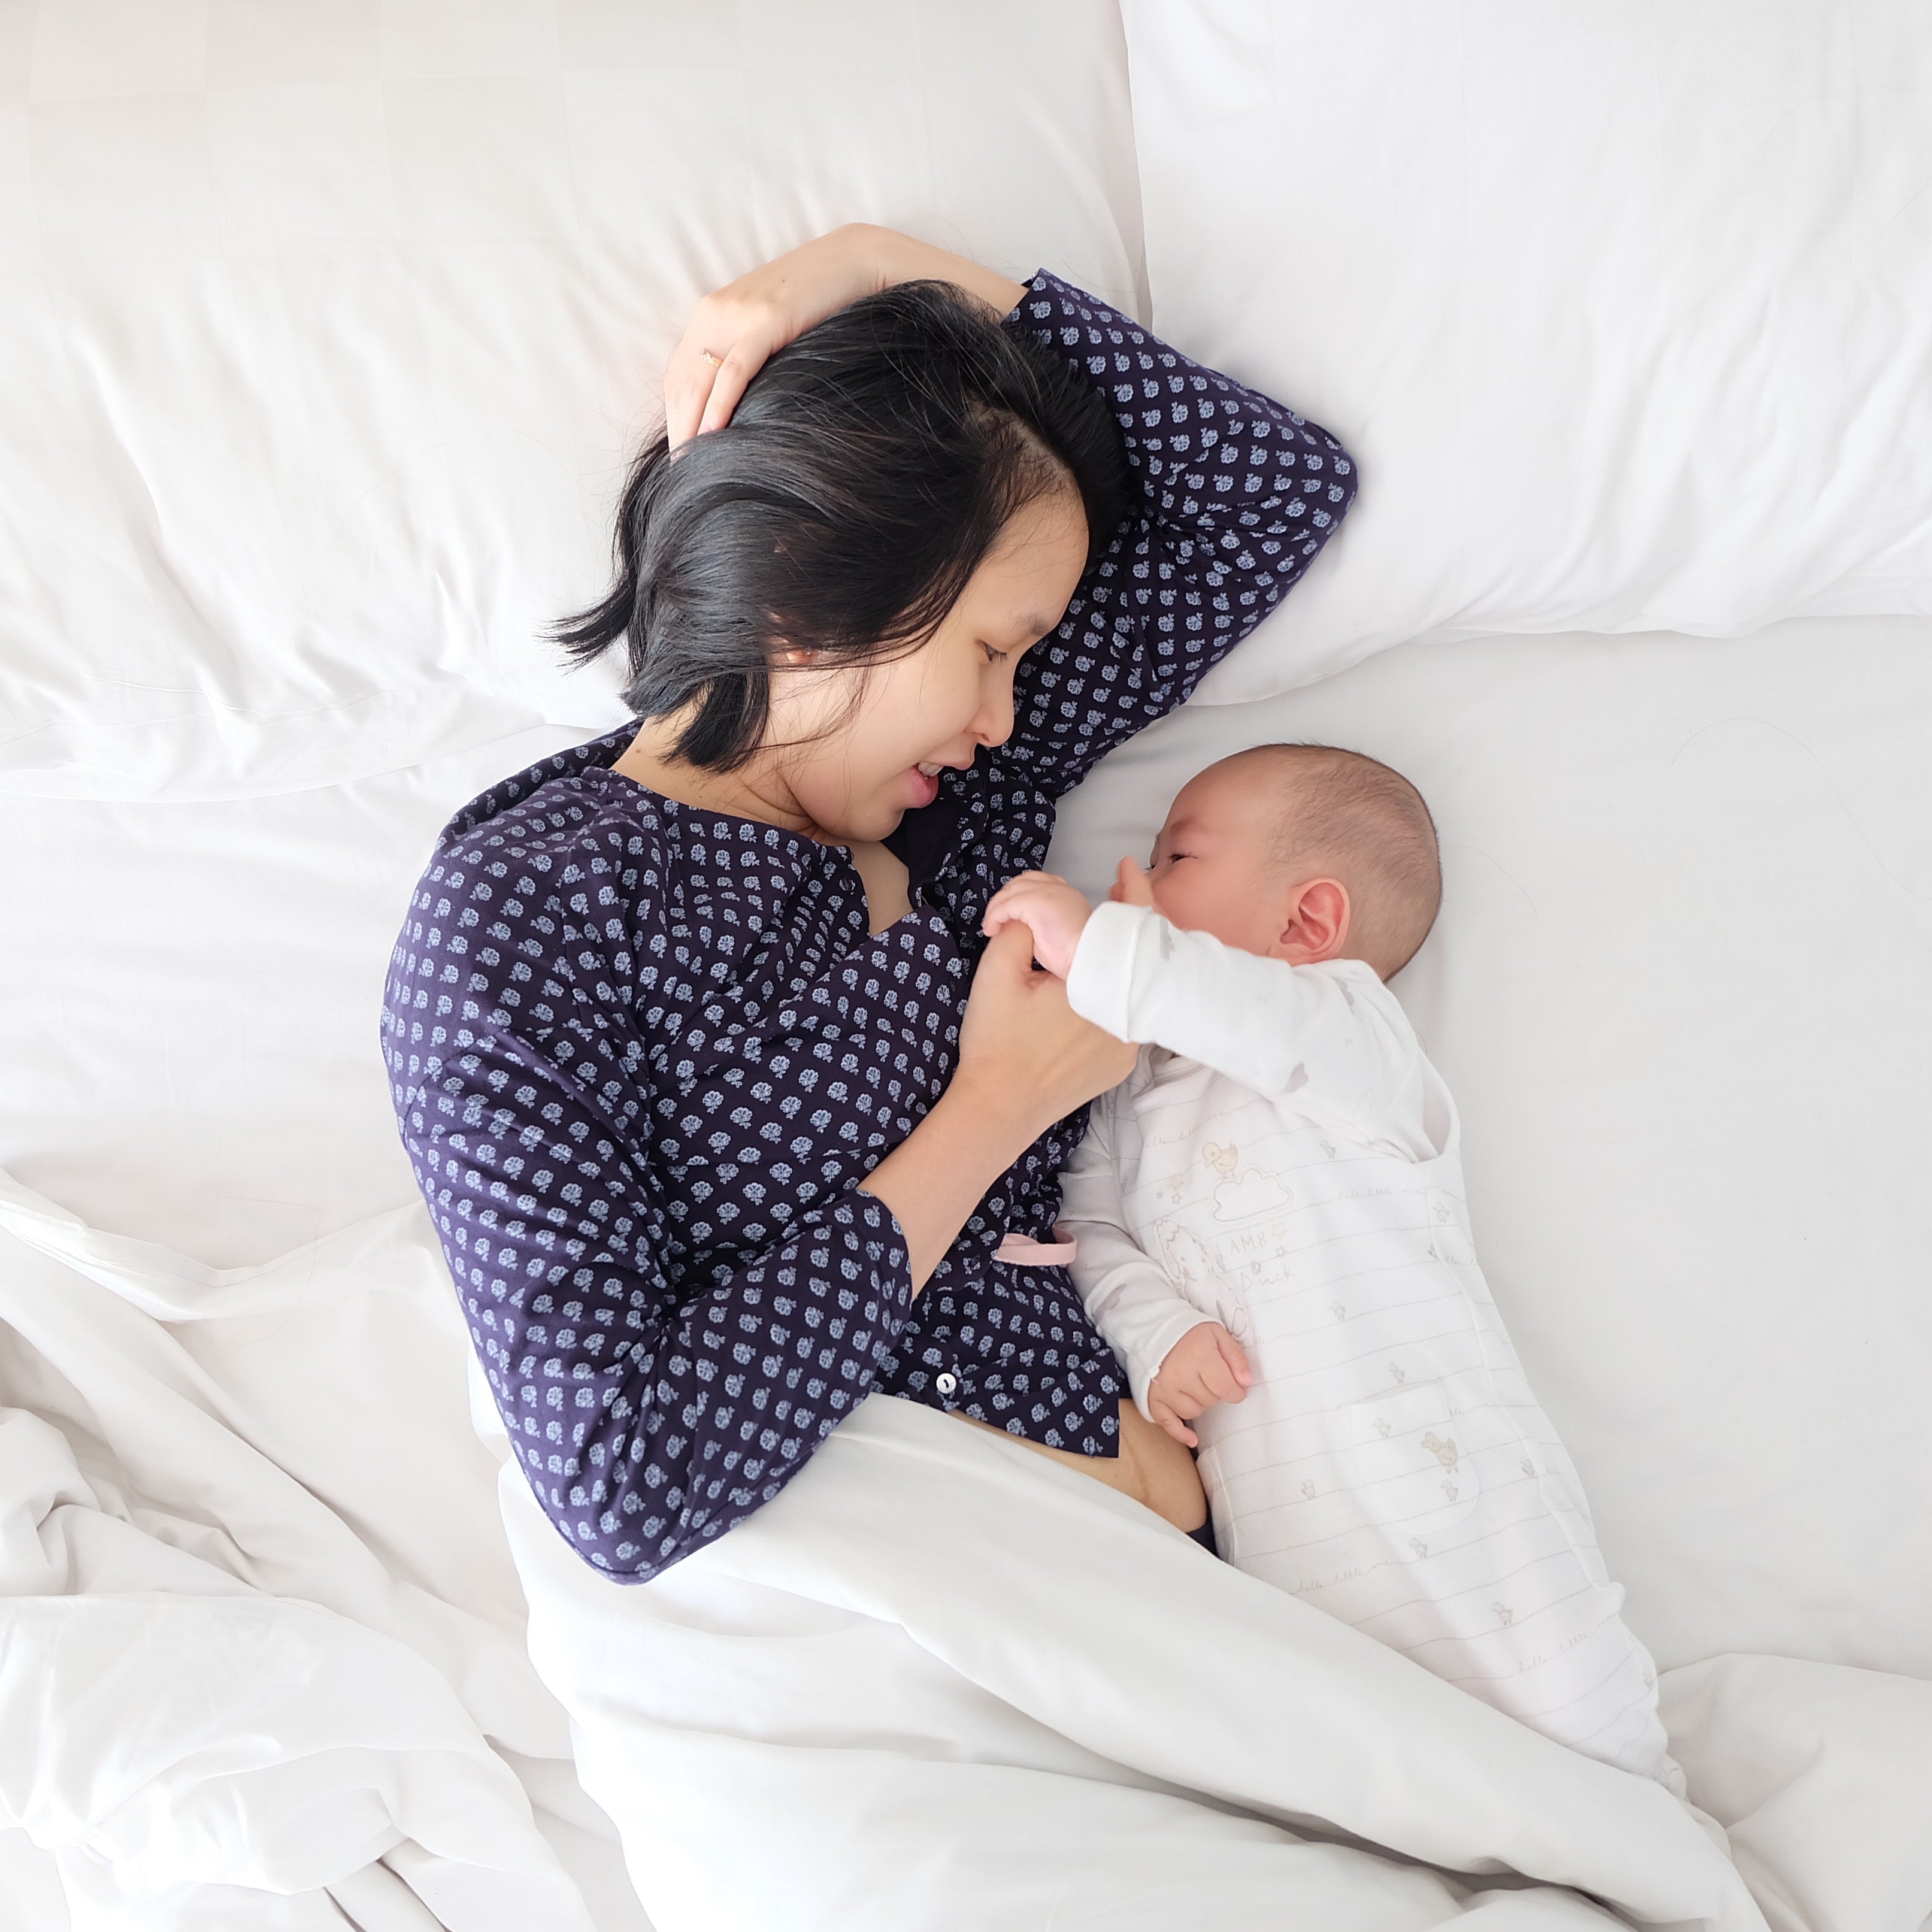 The New Mom's Guide to Breastfeeding at Night